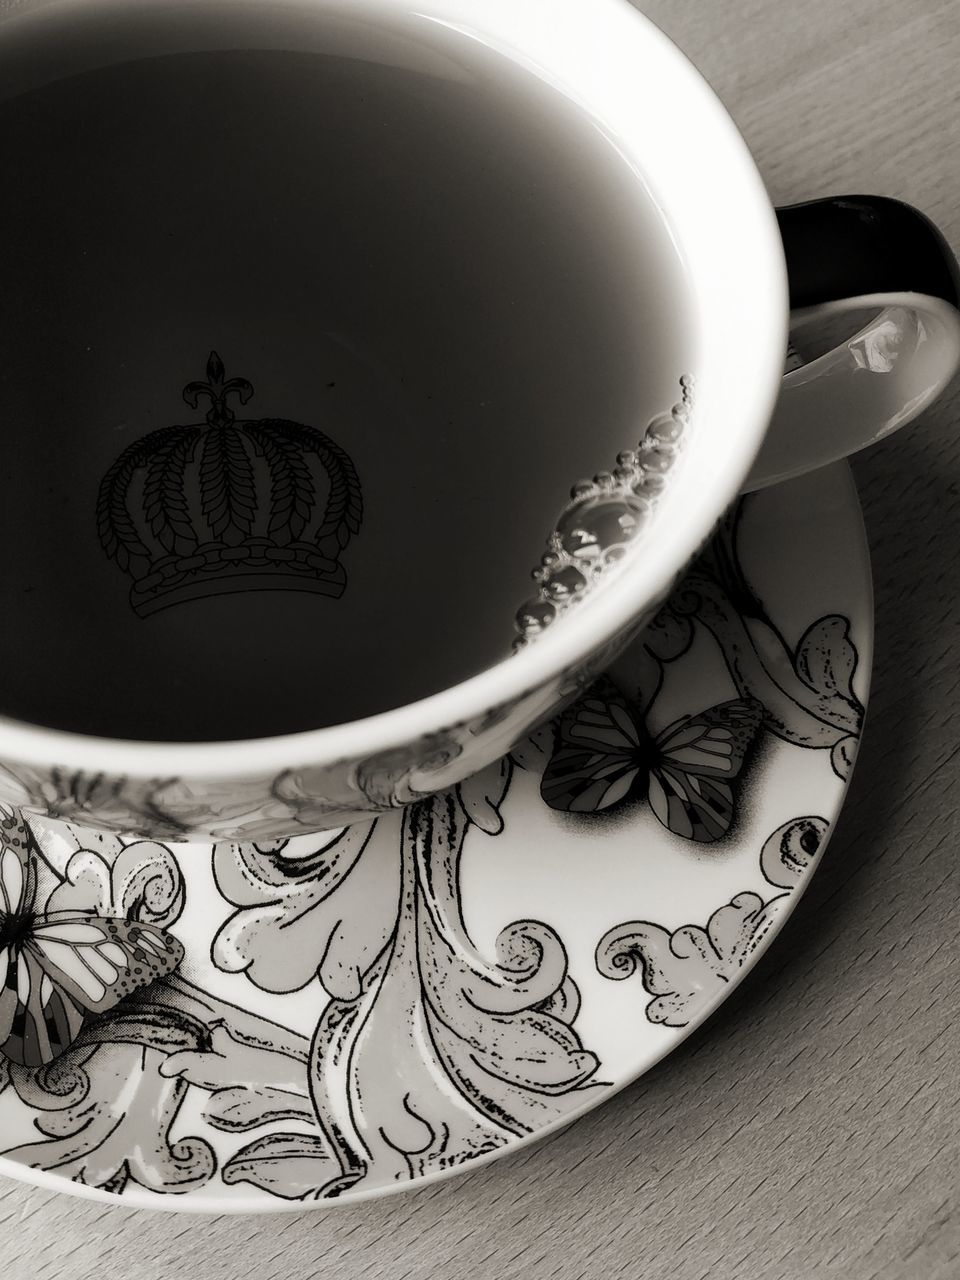 cup, food and drink, mug, drink, still life, tea, indoors, table, refreshment, crockery, high angle view, no people, close-up, tea - hot drink, food, saucer, hot drink, tea cup, coffee, pattern, teapot, floral pattern